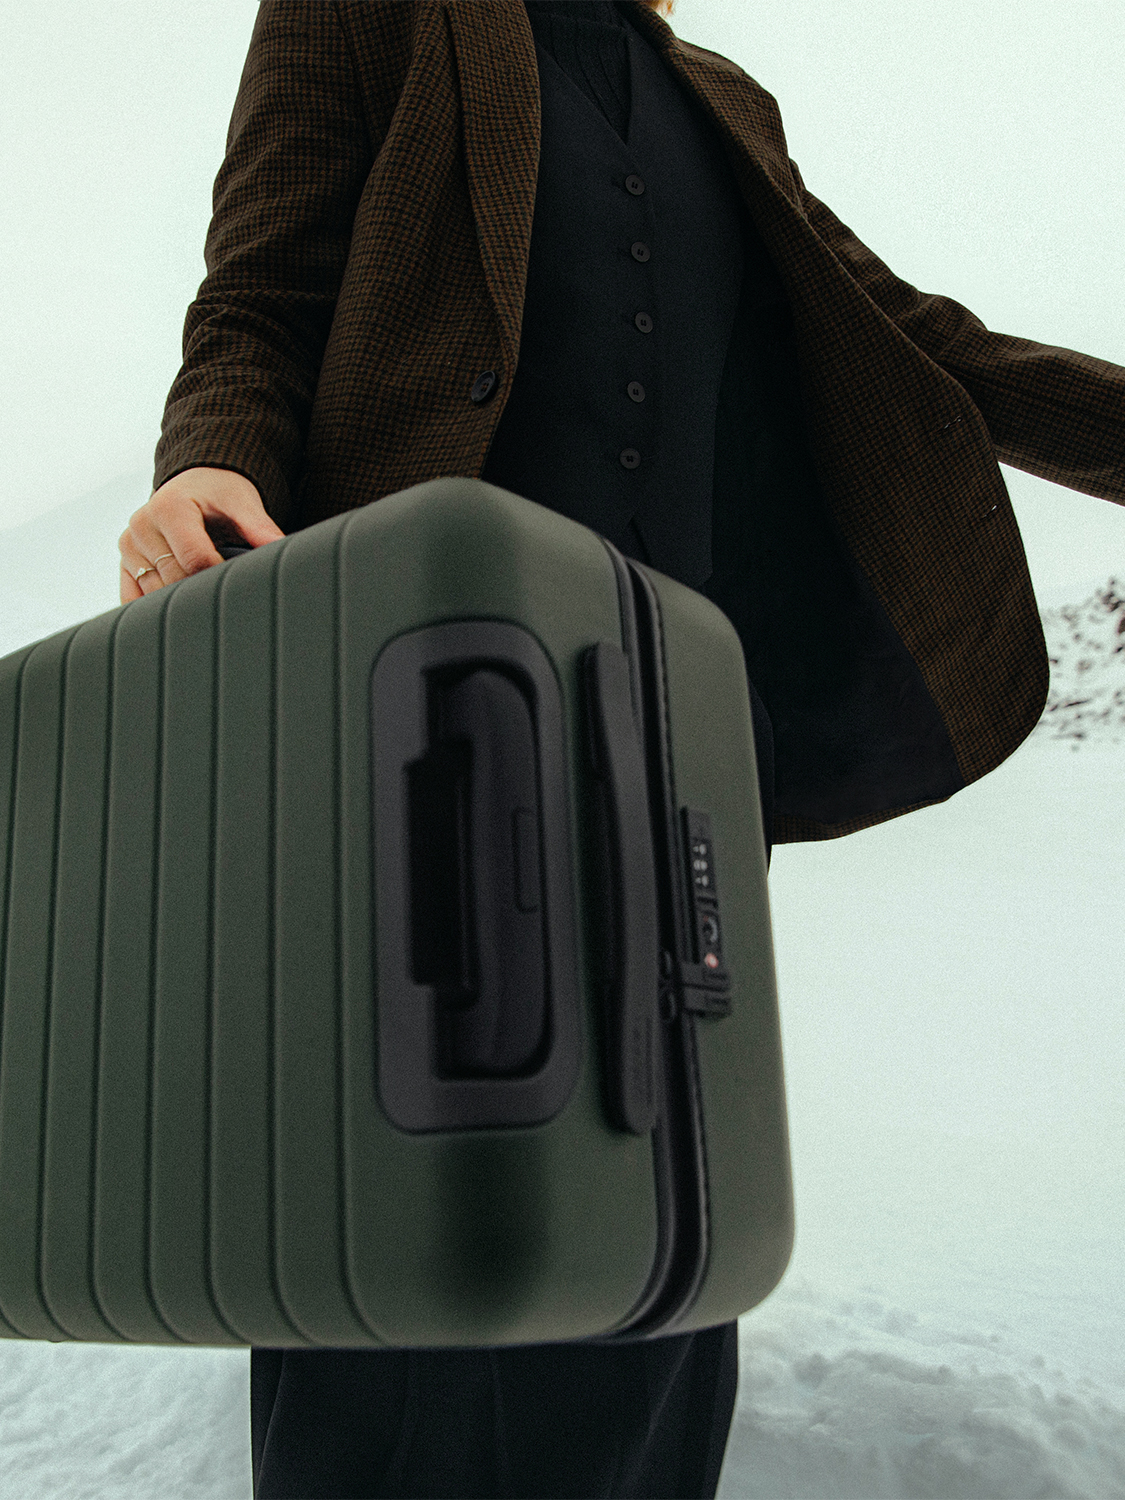 AWAY UNVEILS THEIR NEXT CHAPTER WITH THE REINTRODUCTION OF THEIR ICONIC  LUGGAGE, INSPIRED BY THEIR GLOBAL COMMUNITY OF TRAVELERS